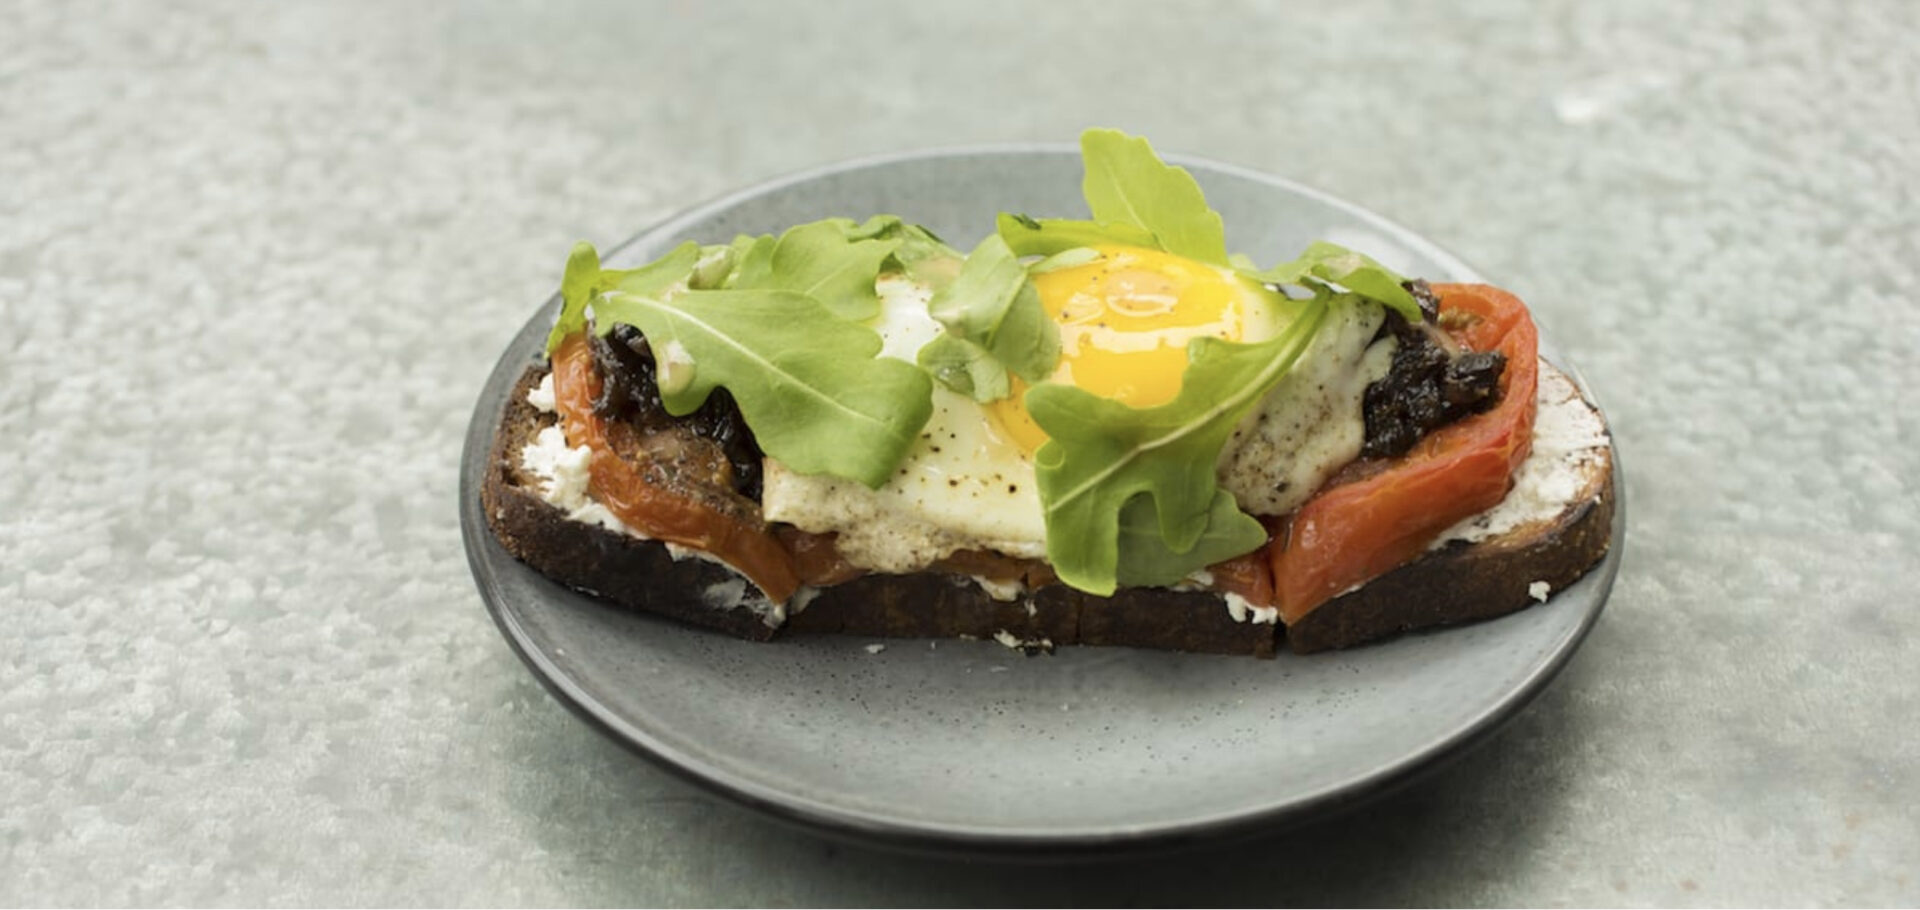 tomato toast with fried egg and bacon marmalade